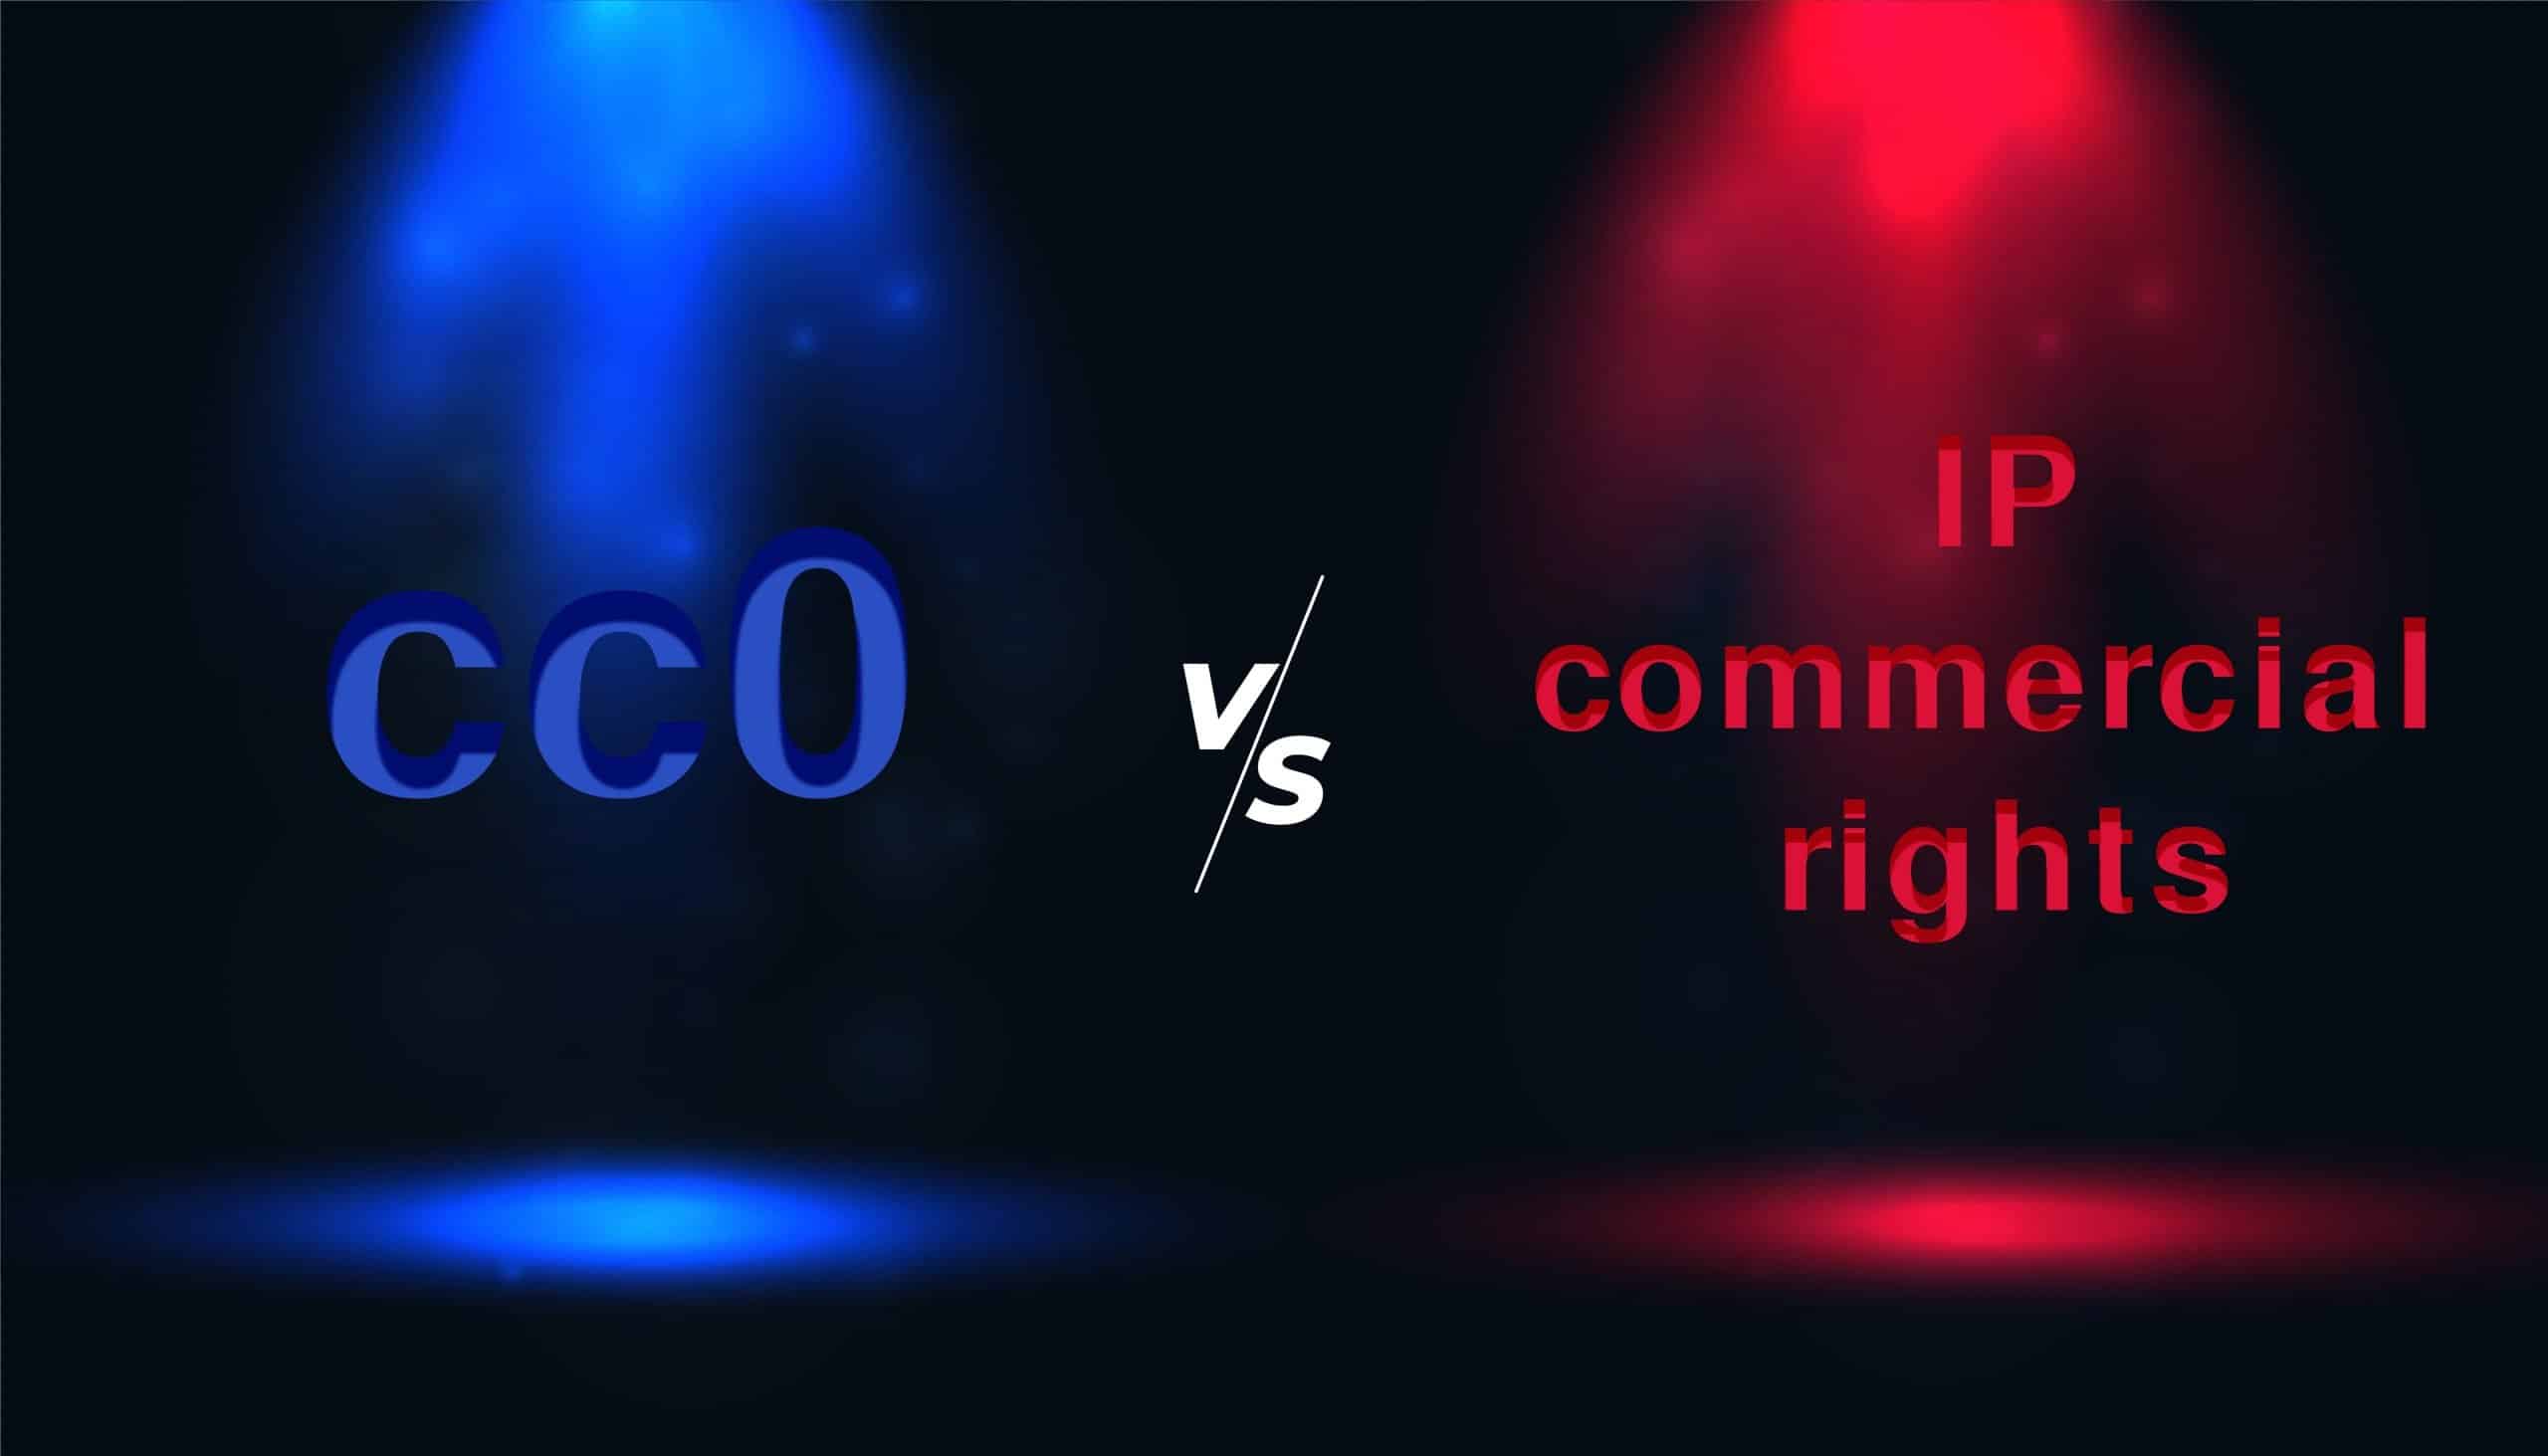 cc0 vs IP commercial rights abstract image